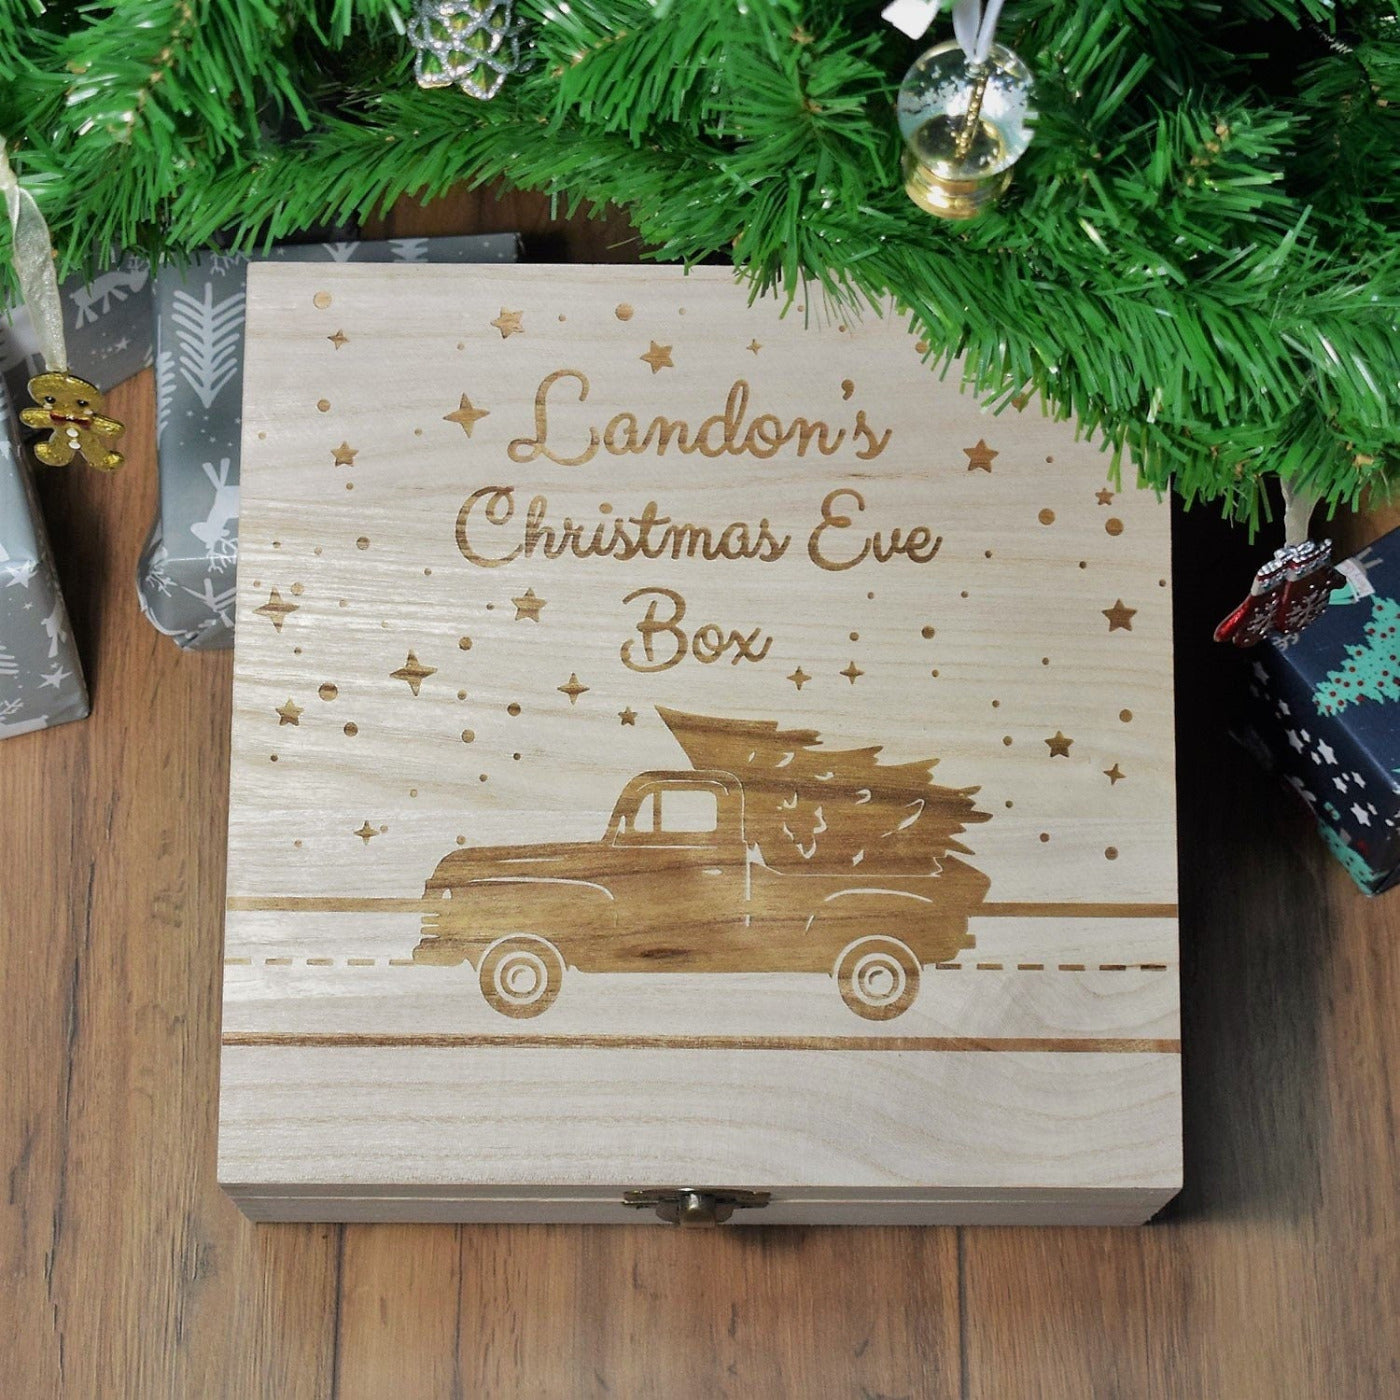 Personalised, Engraved Wooden Christmas Eve Box - Christmas Truck & Tree